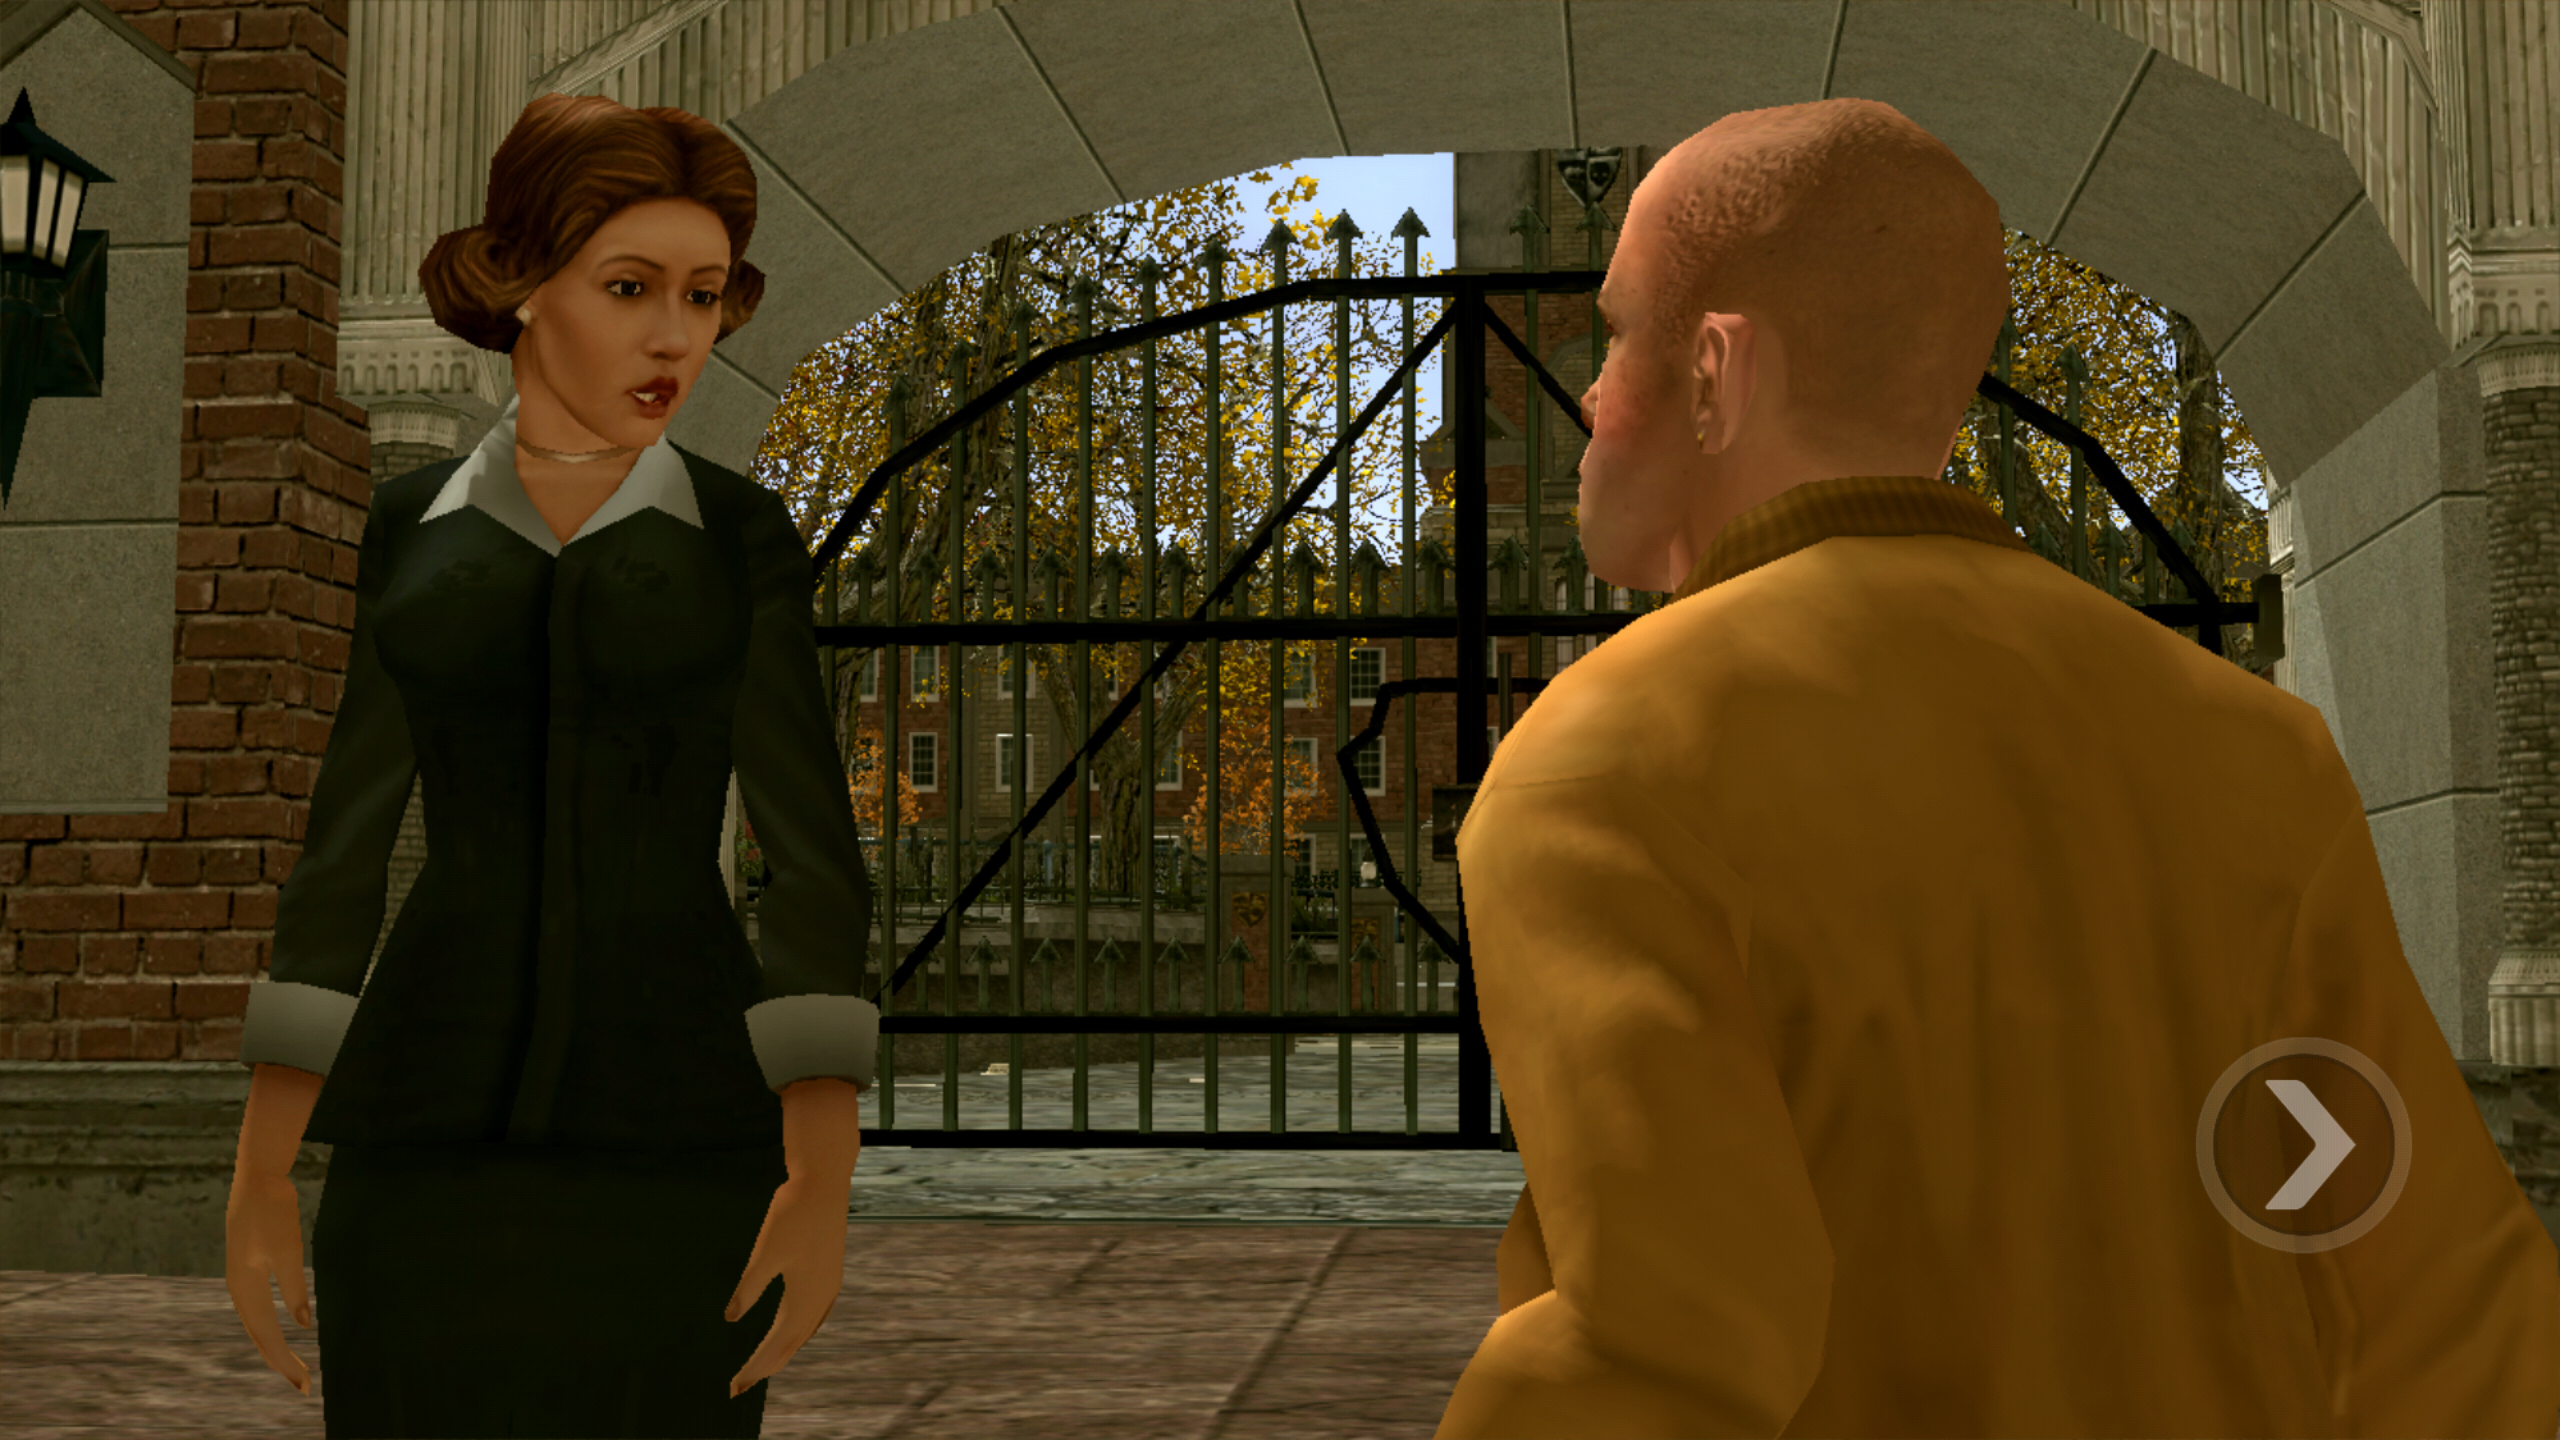 Bully: Anniversary Edition Now Available for iOS and Android - Rockstar  Games